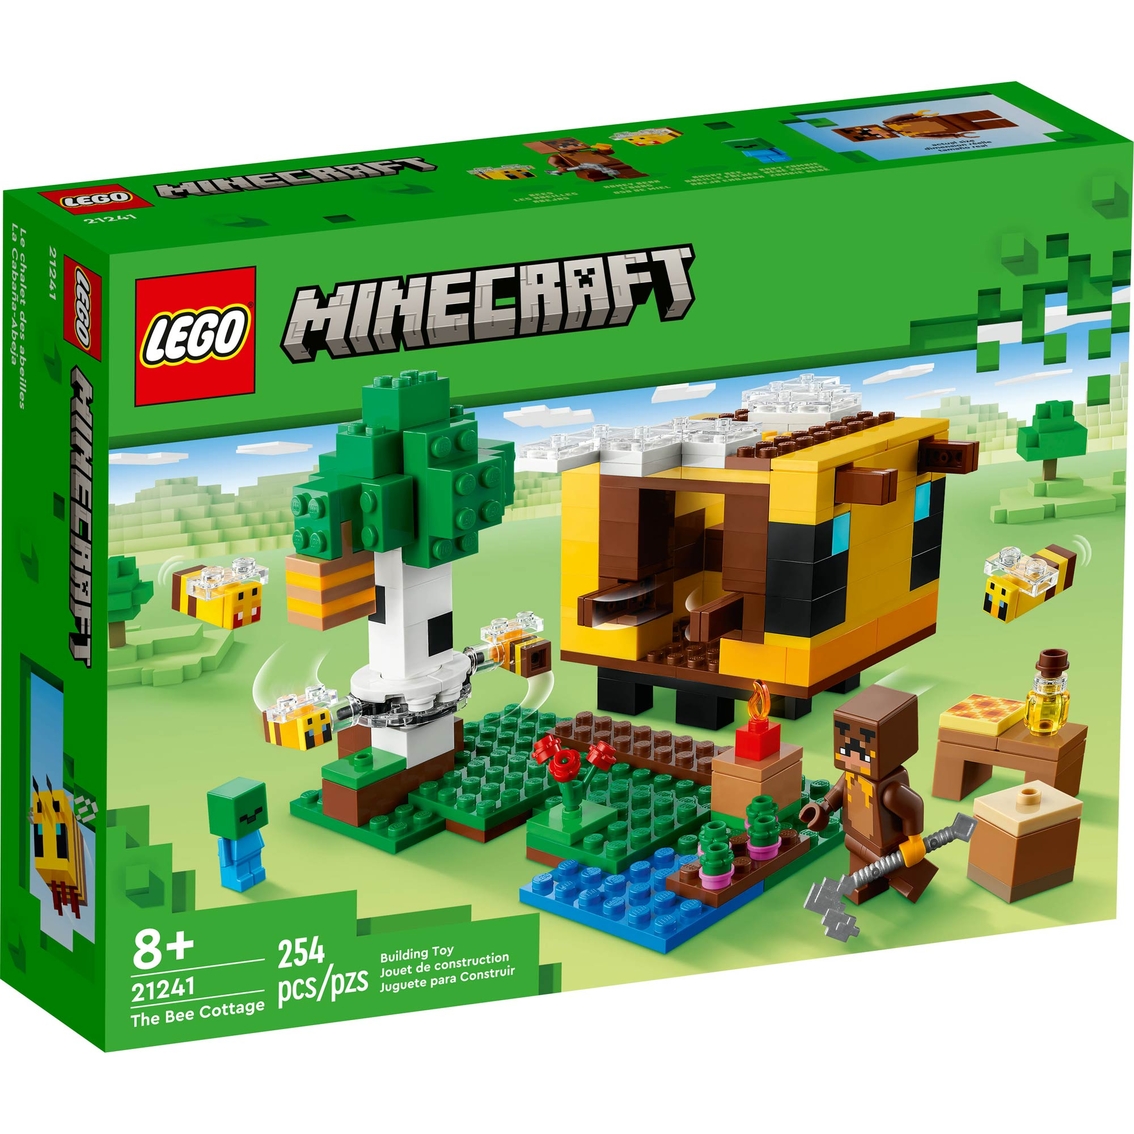 Lego Minecraft The Bee Cottage 21241 | Building Toys | Baby & Toys ...